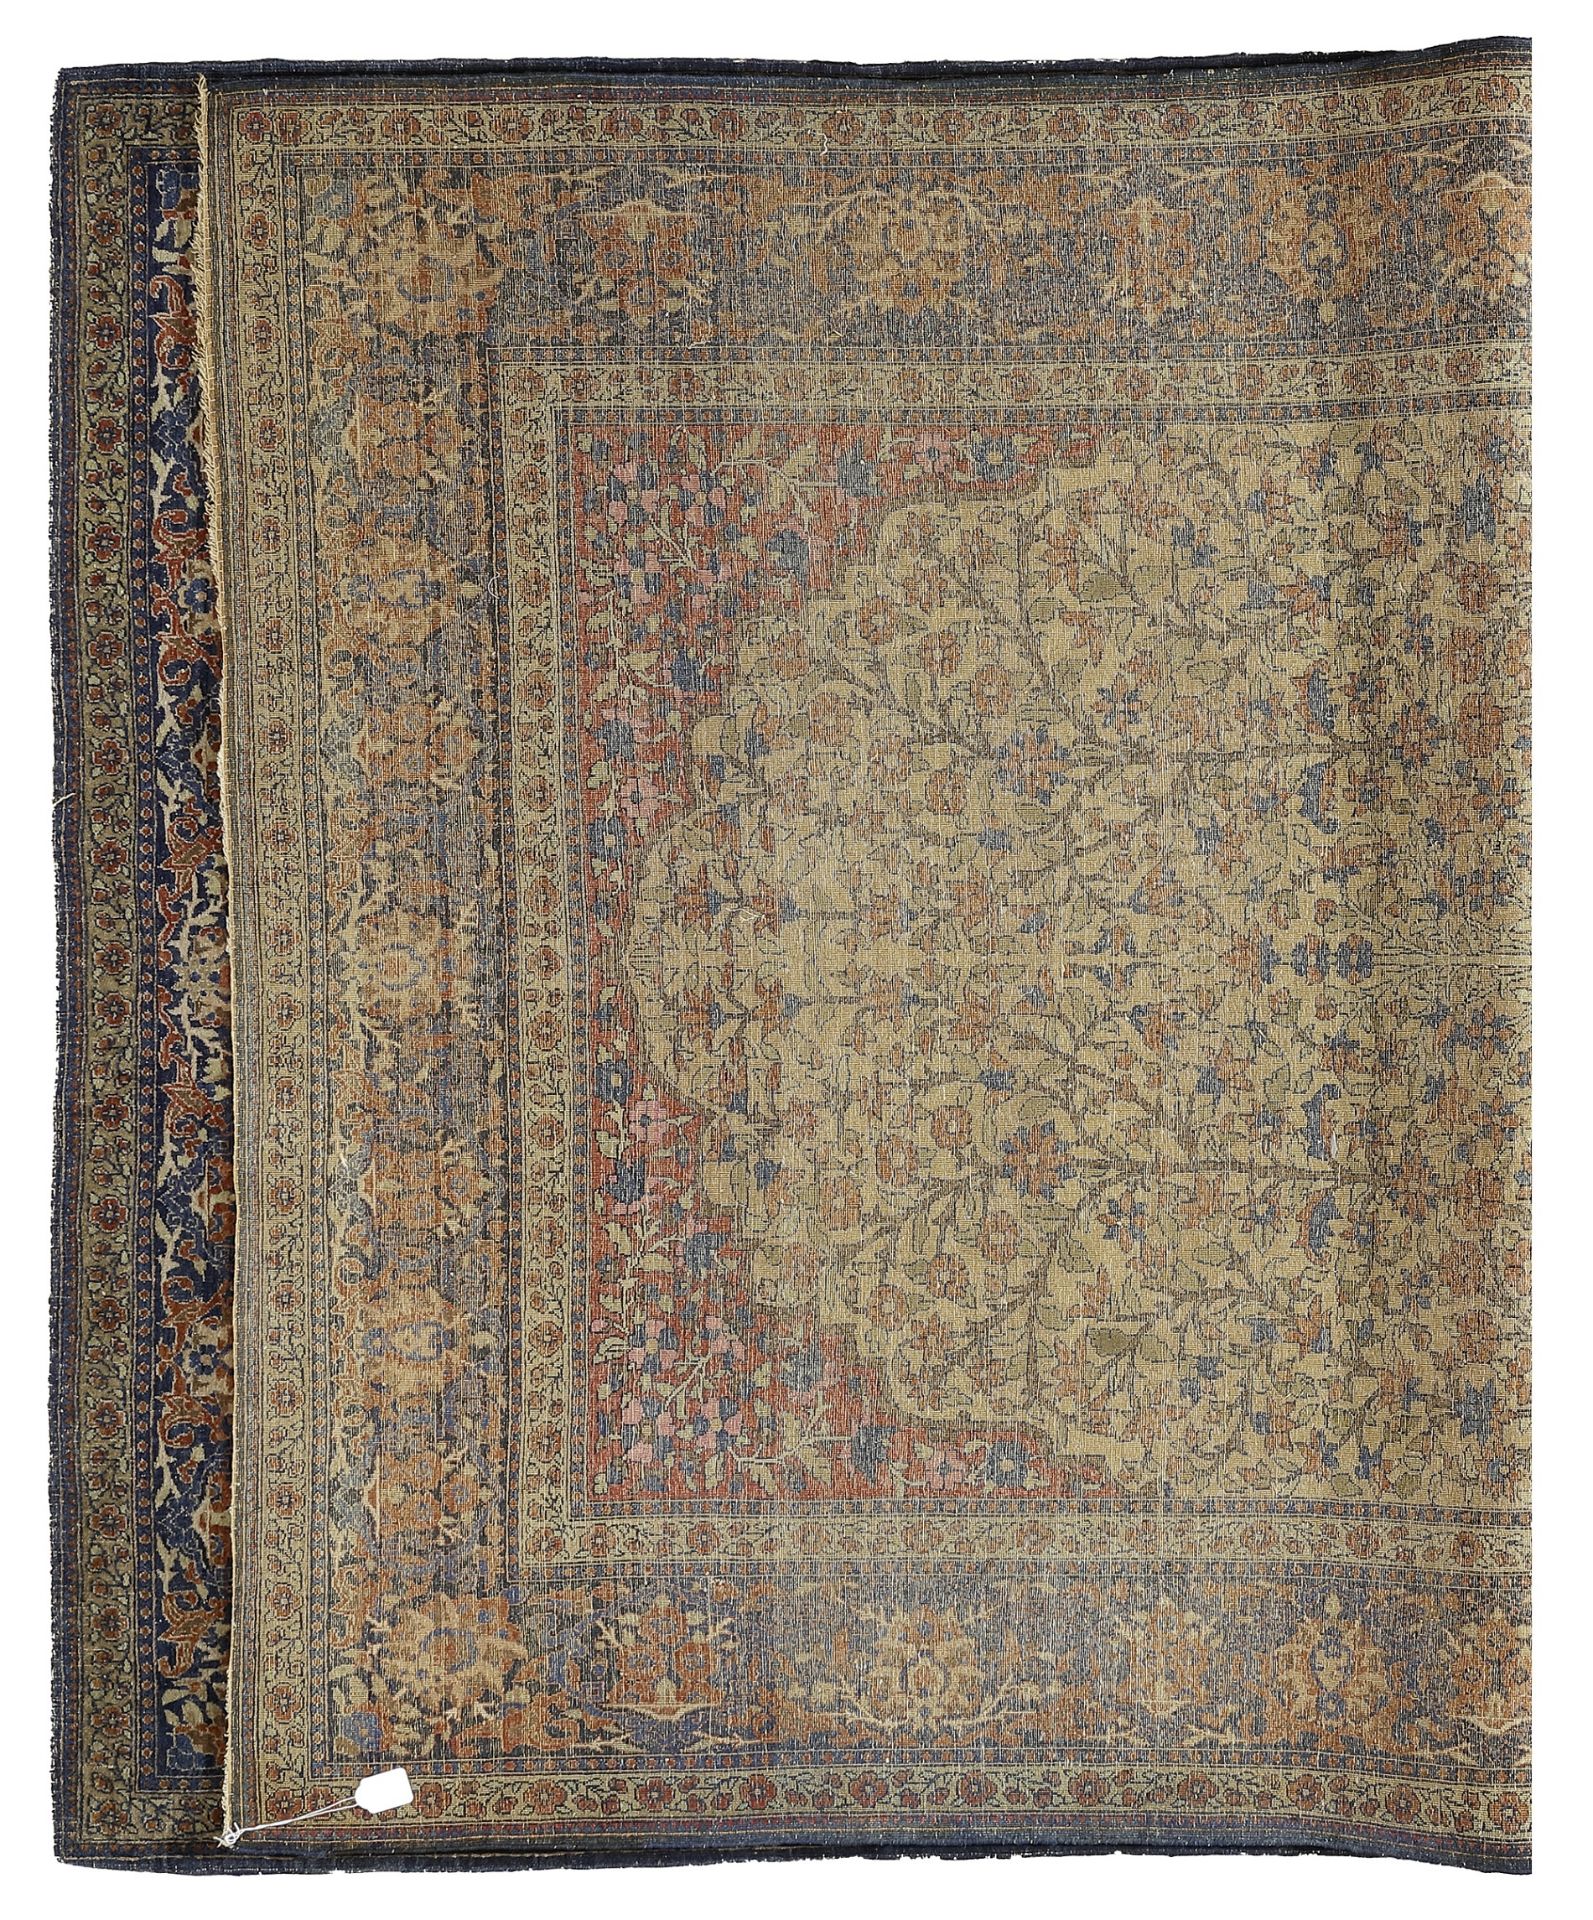 A PERSIAN THERAN OR MOTHASHAM RUG, LATE 19TH CENTURY - Image 2 of 2